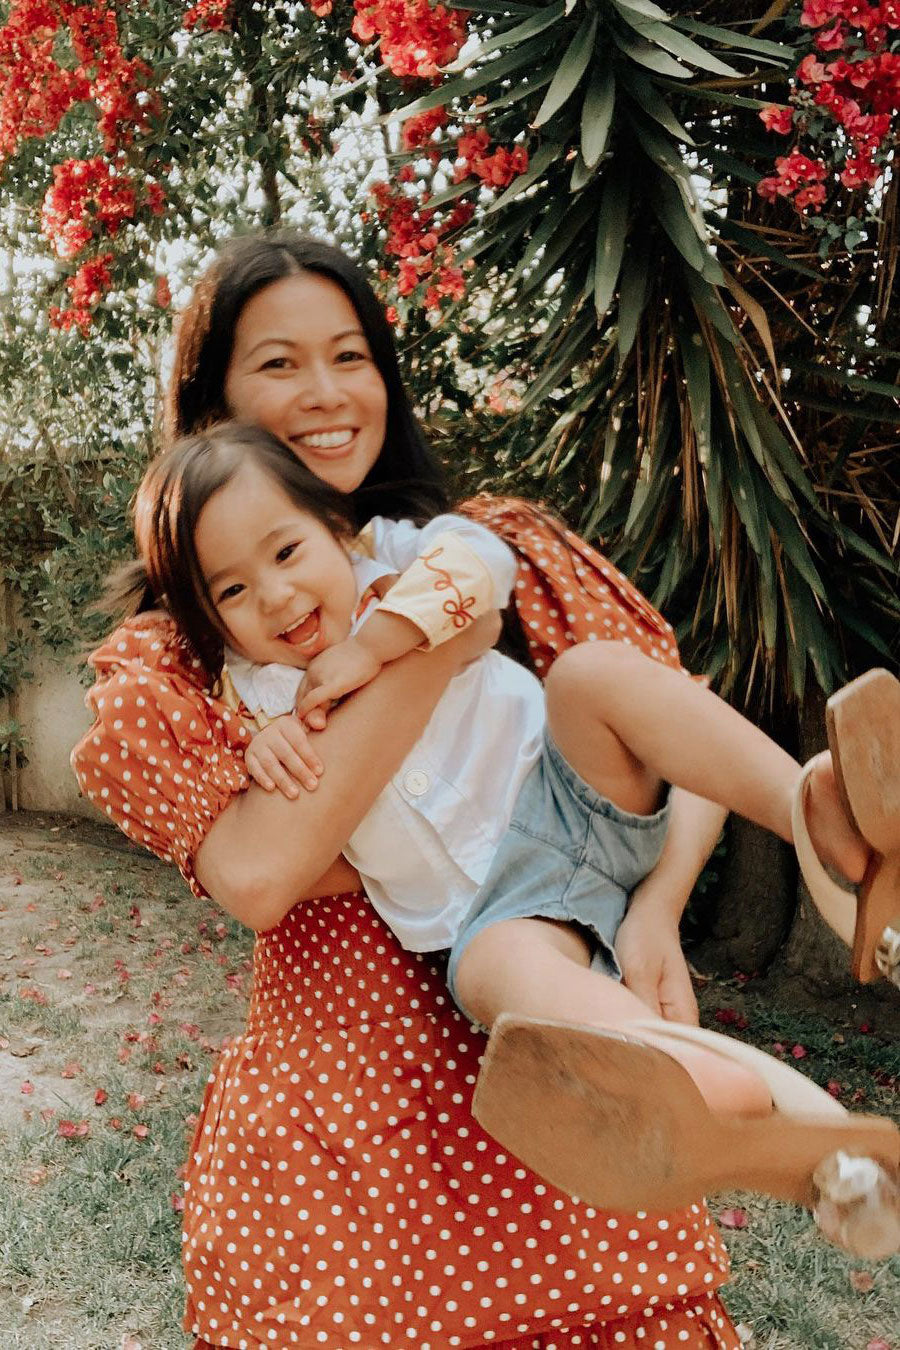 Perelel Lives: Revolve's Raissa Gerona on Her Surprise Pregnancy & How She Leaned Into Her New Identity as a Mom